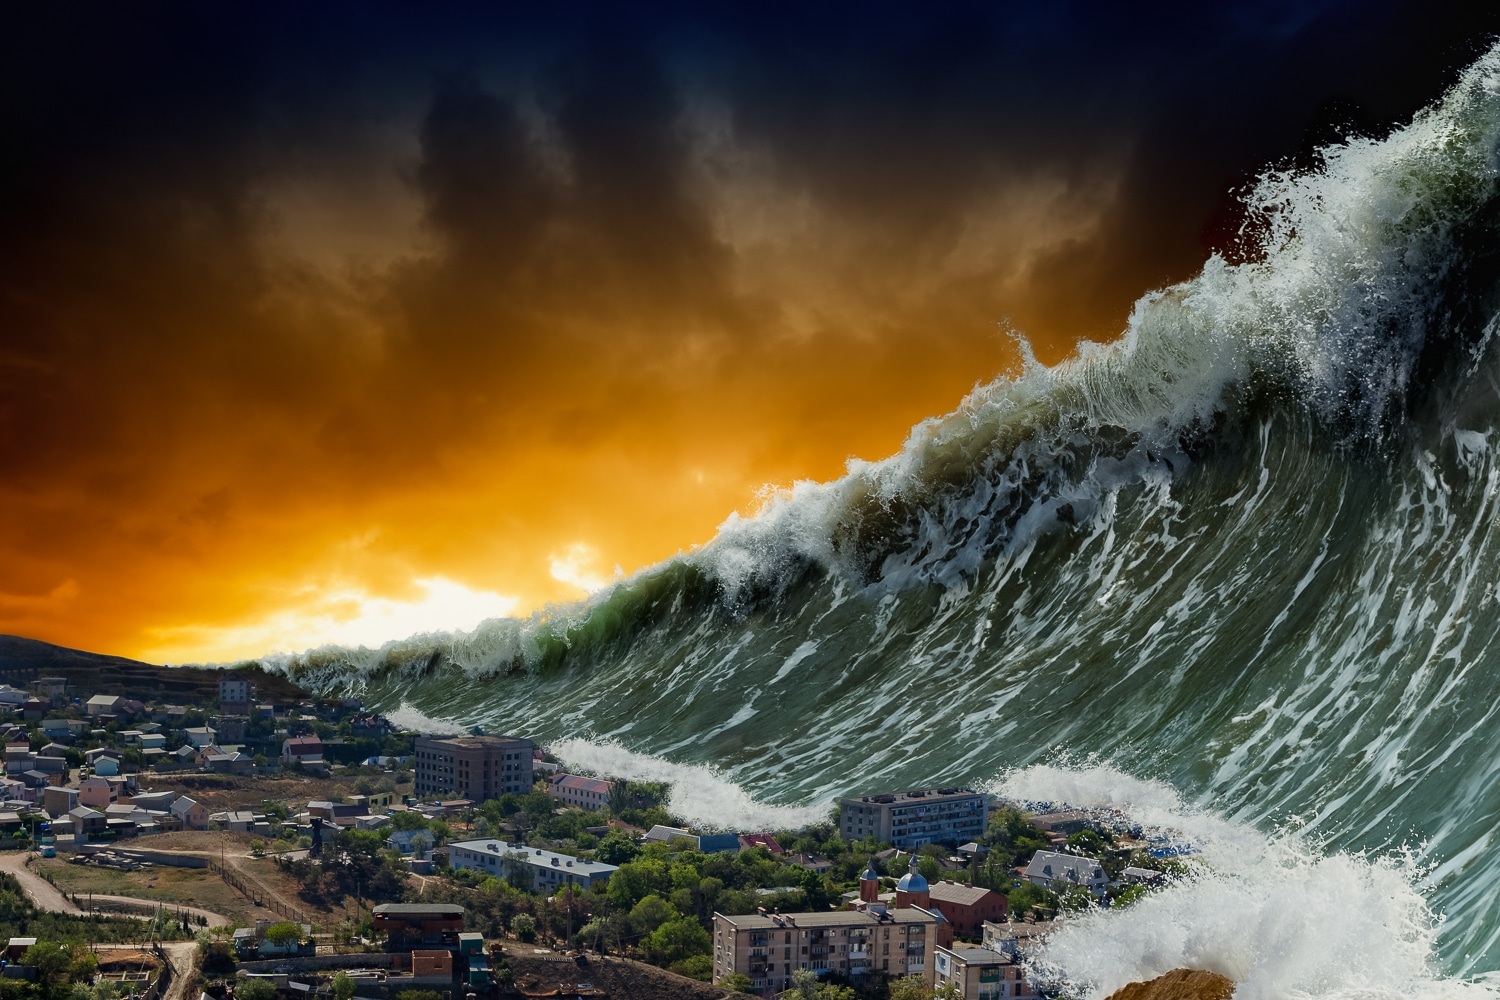 Huge Tsunami about to hit a town to show COVID19 effects the World & increase digital branding for "4 ways for a brand to survive and thrive during Covid-19".